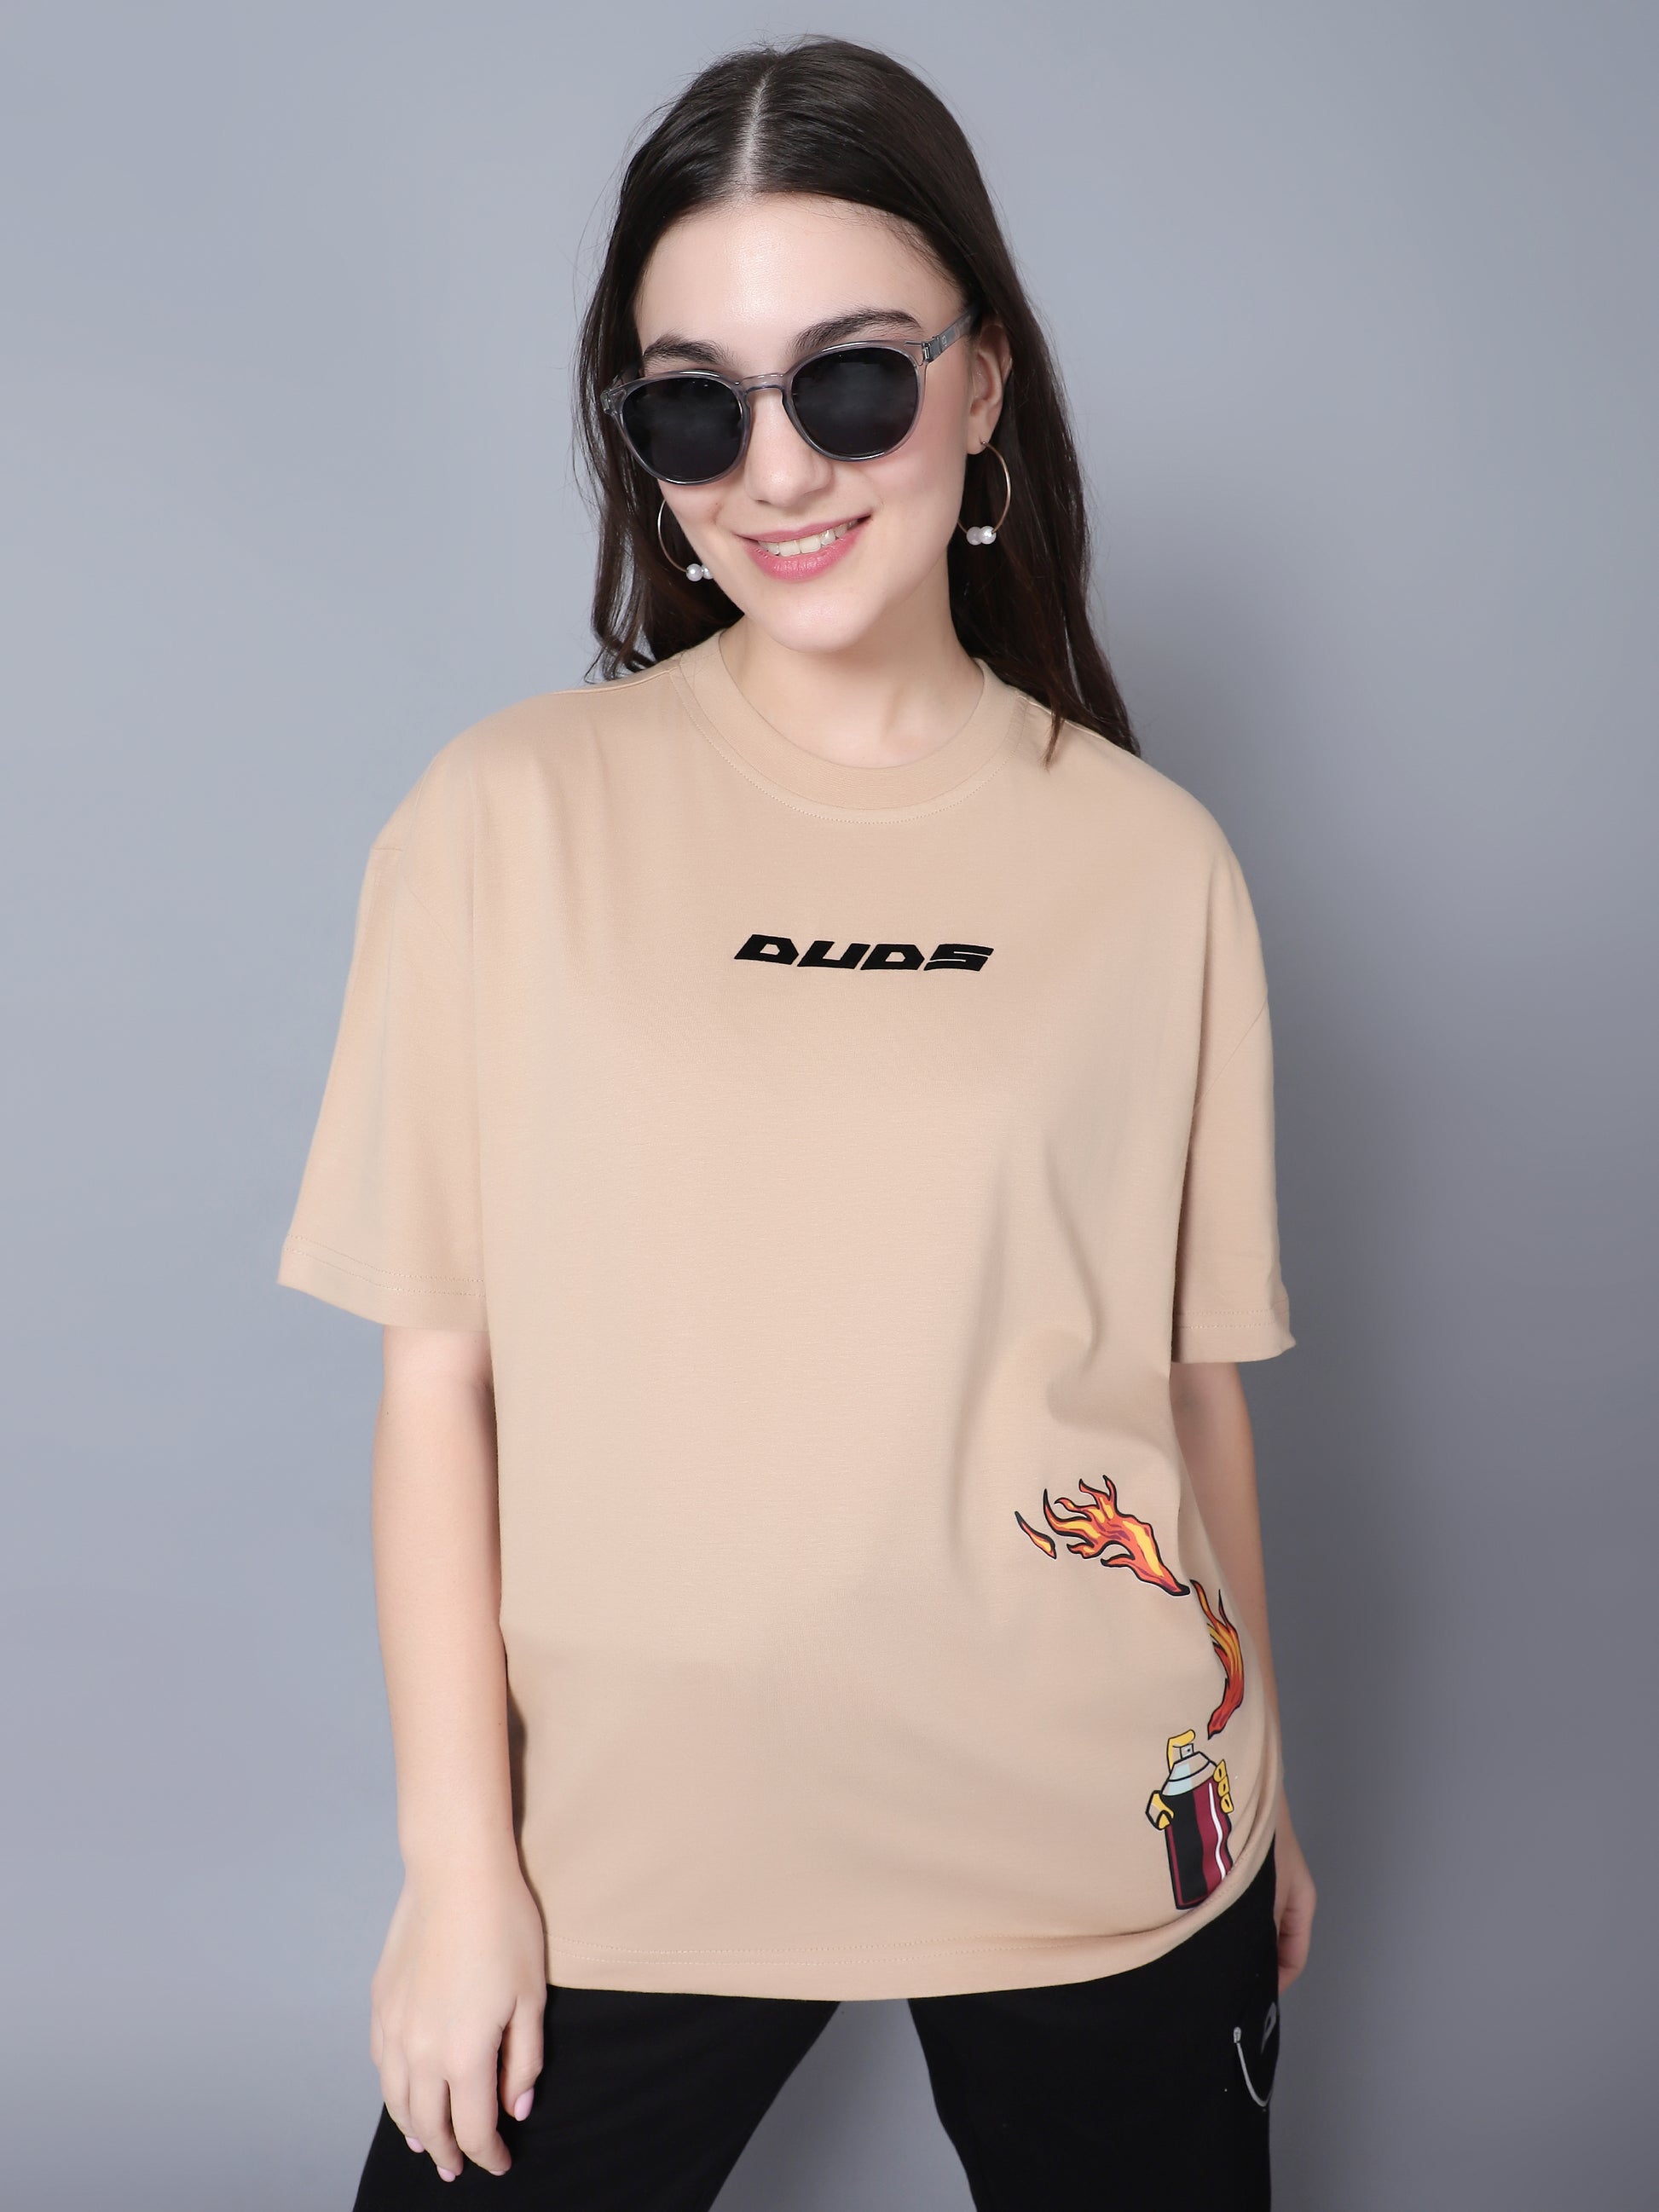 Fire Can Over-Sized T-Shirt (Nude) - Wearduds